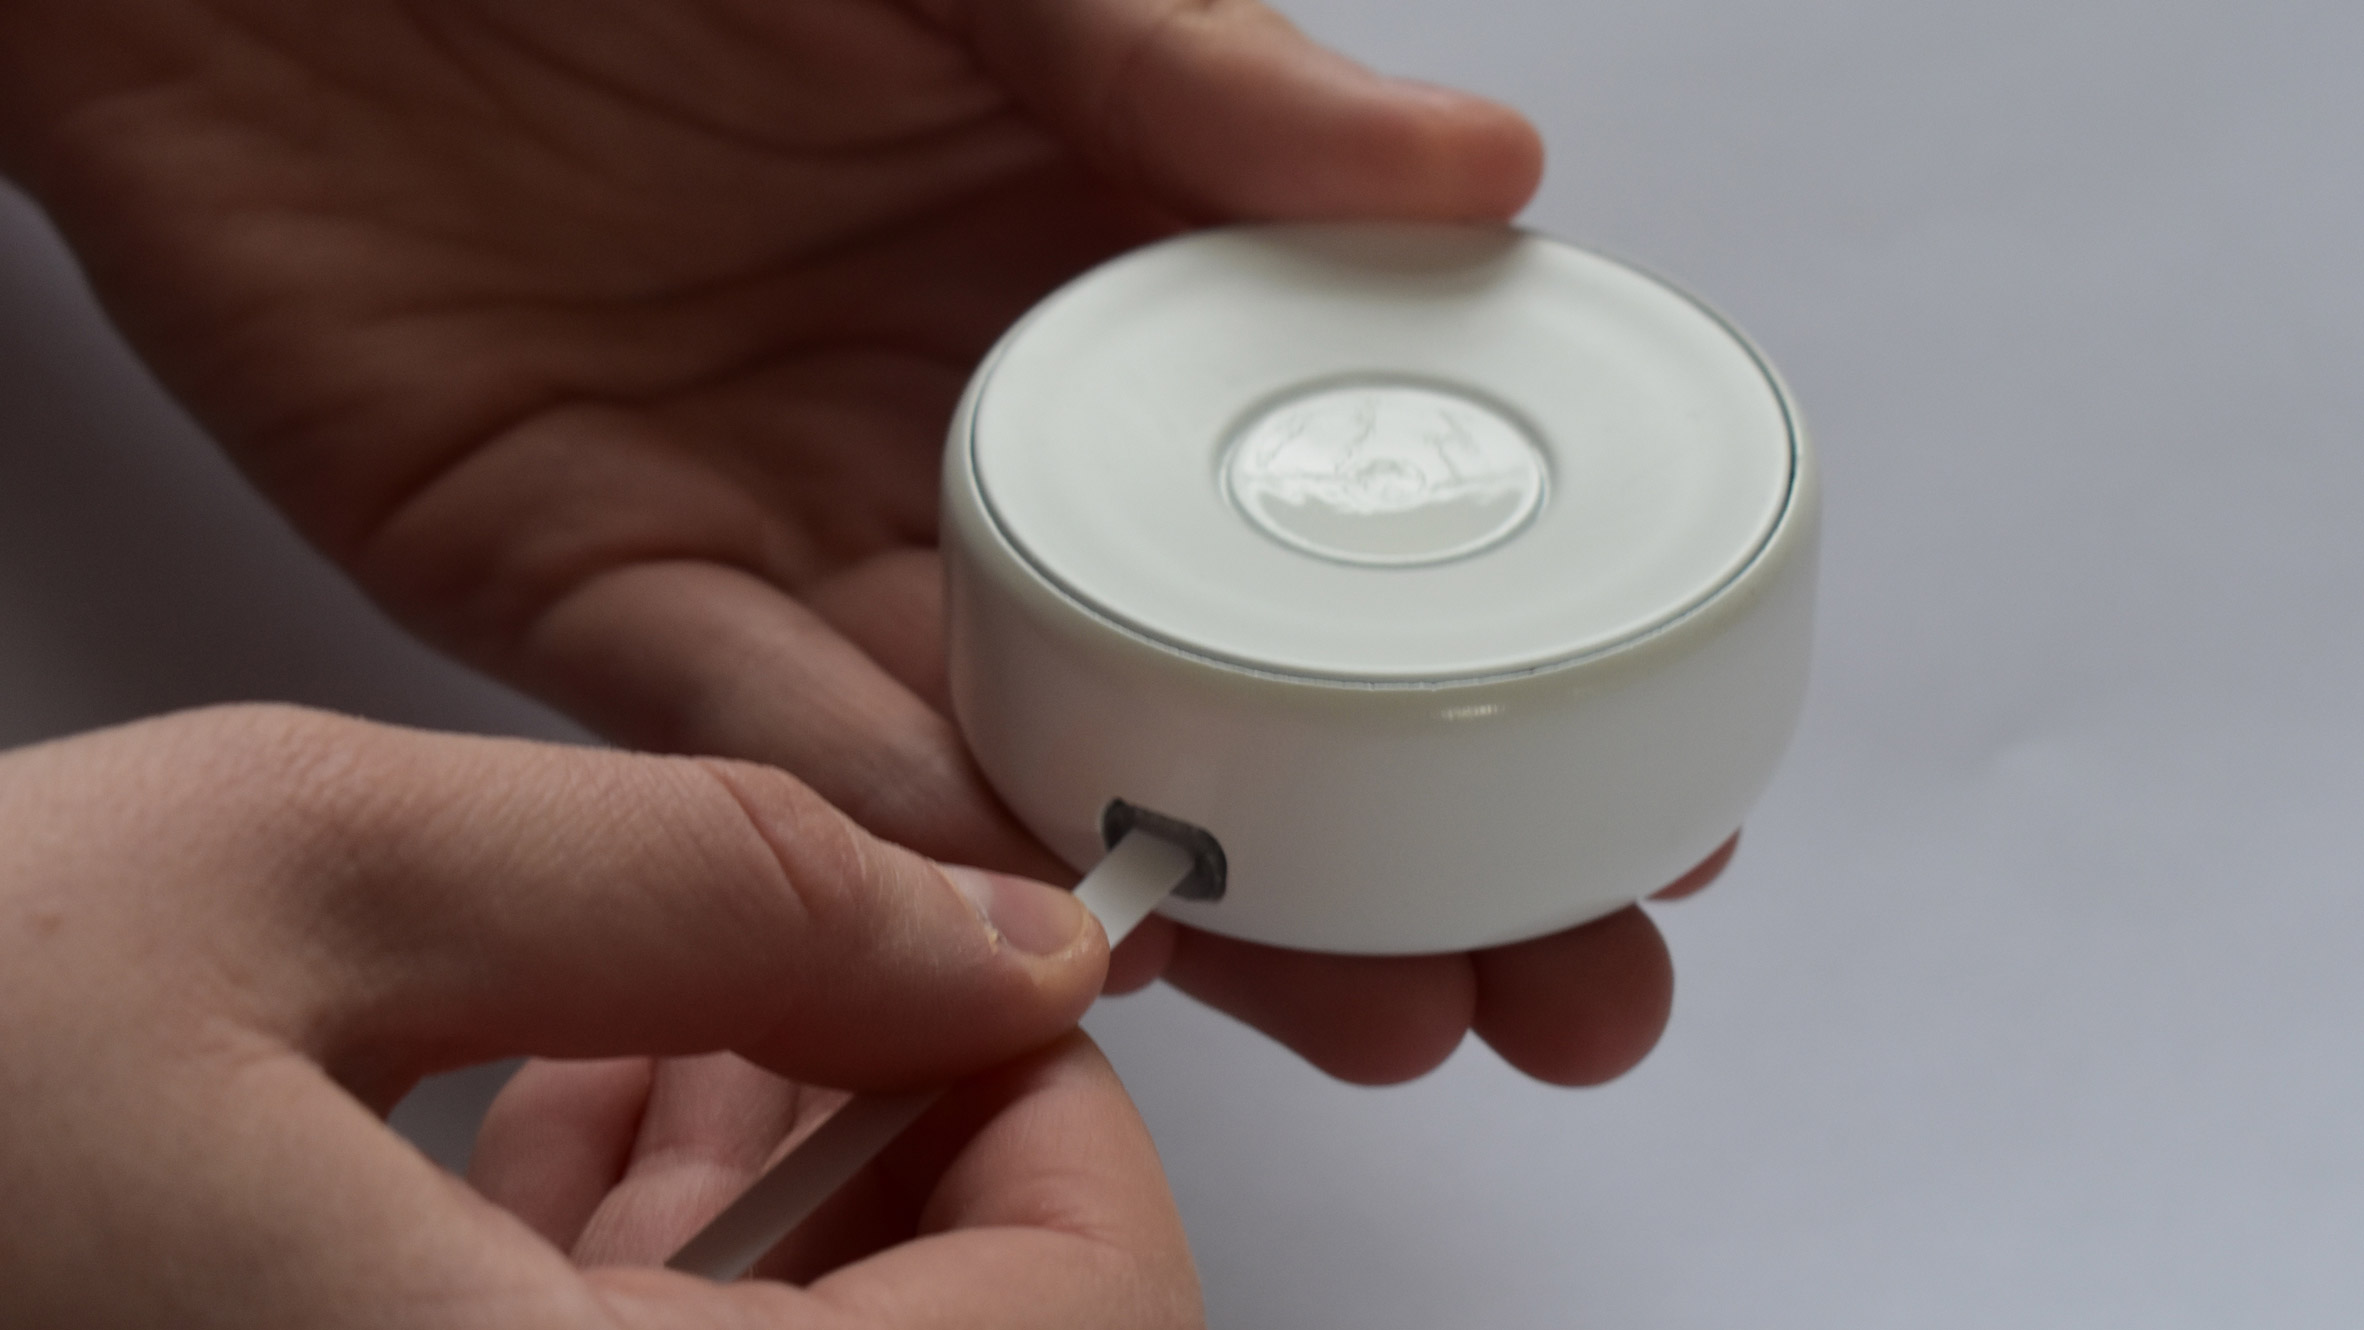 Pocket-sized Ally device tests for food allergens in restaurant meals-0